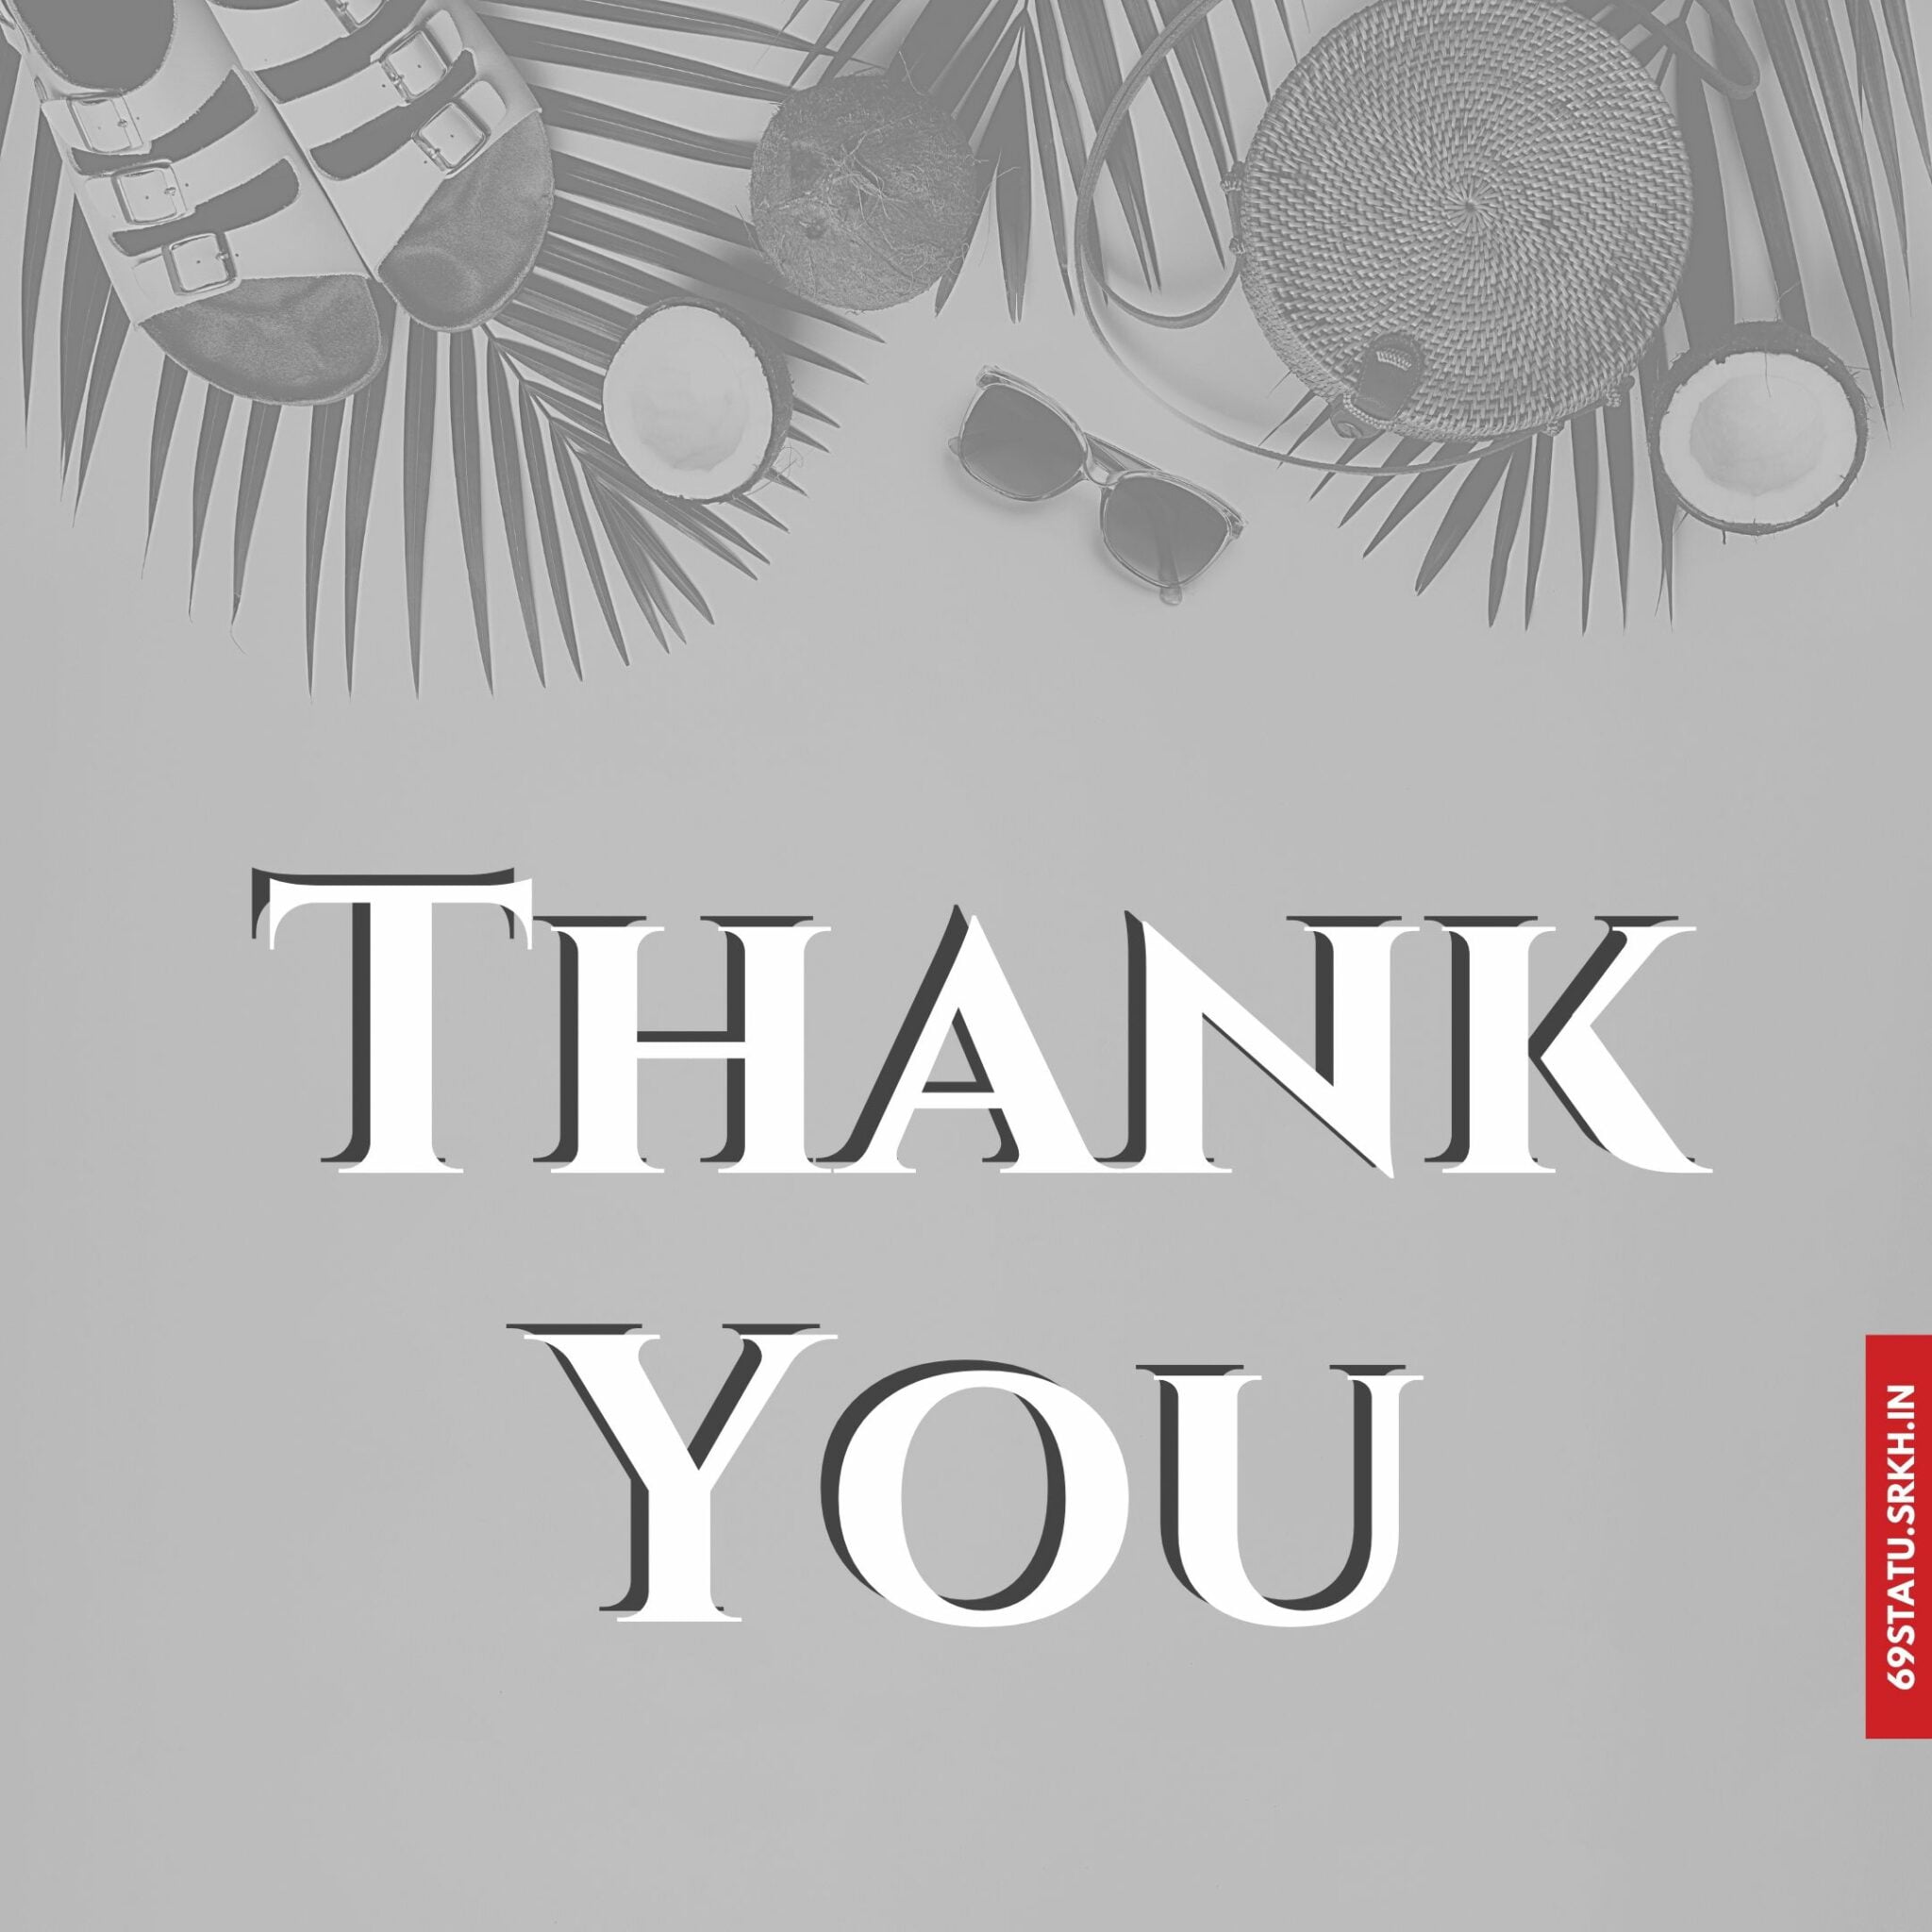 Thank You Images in Black and White HD